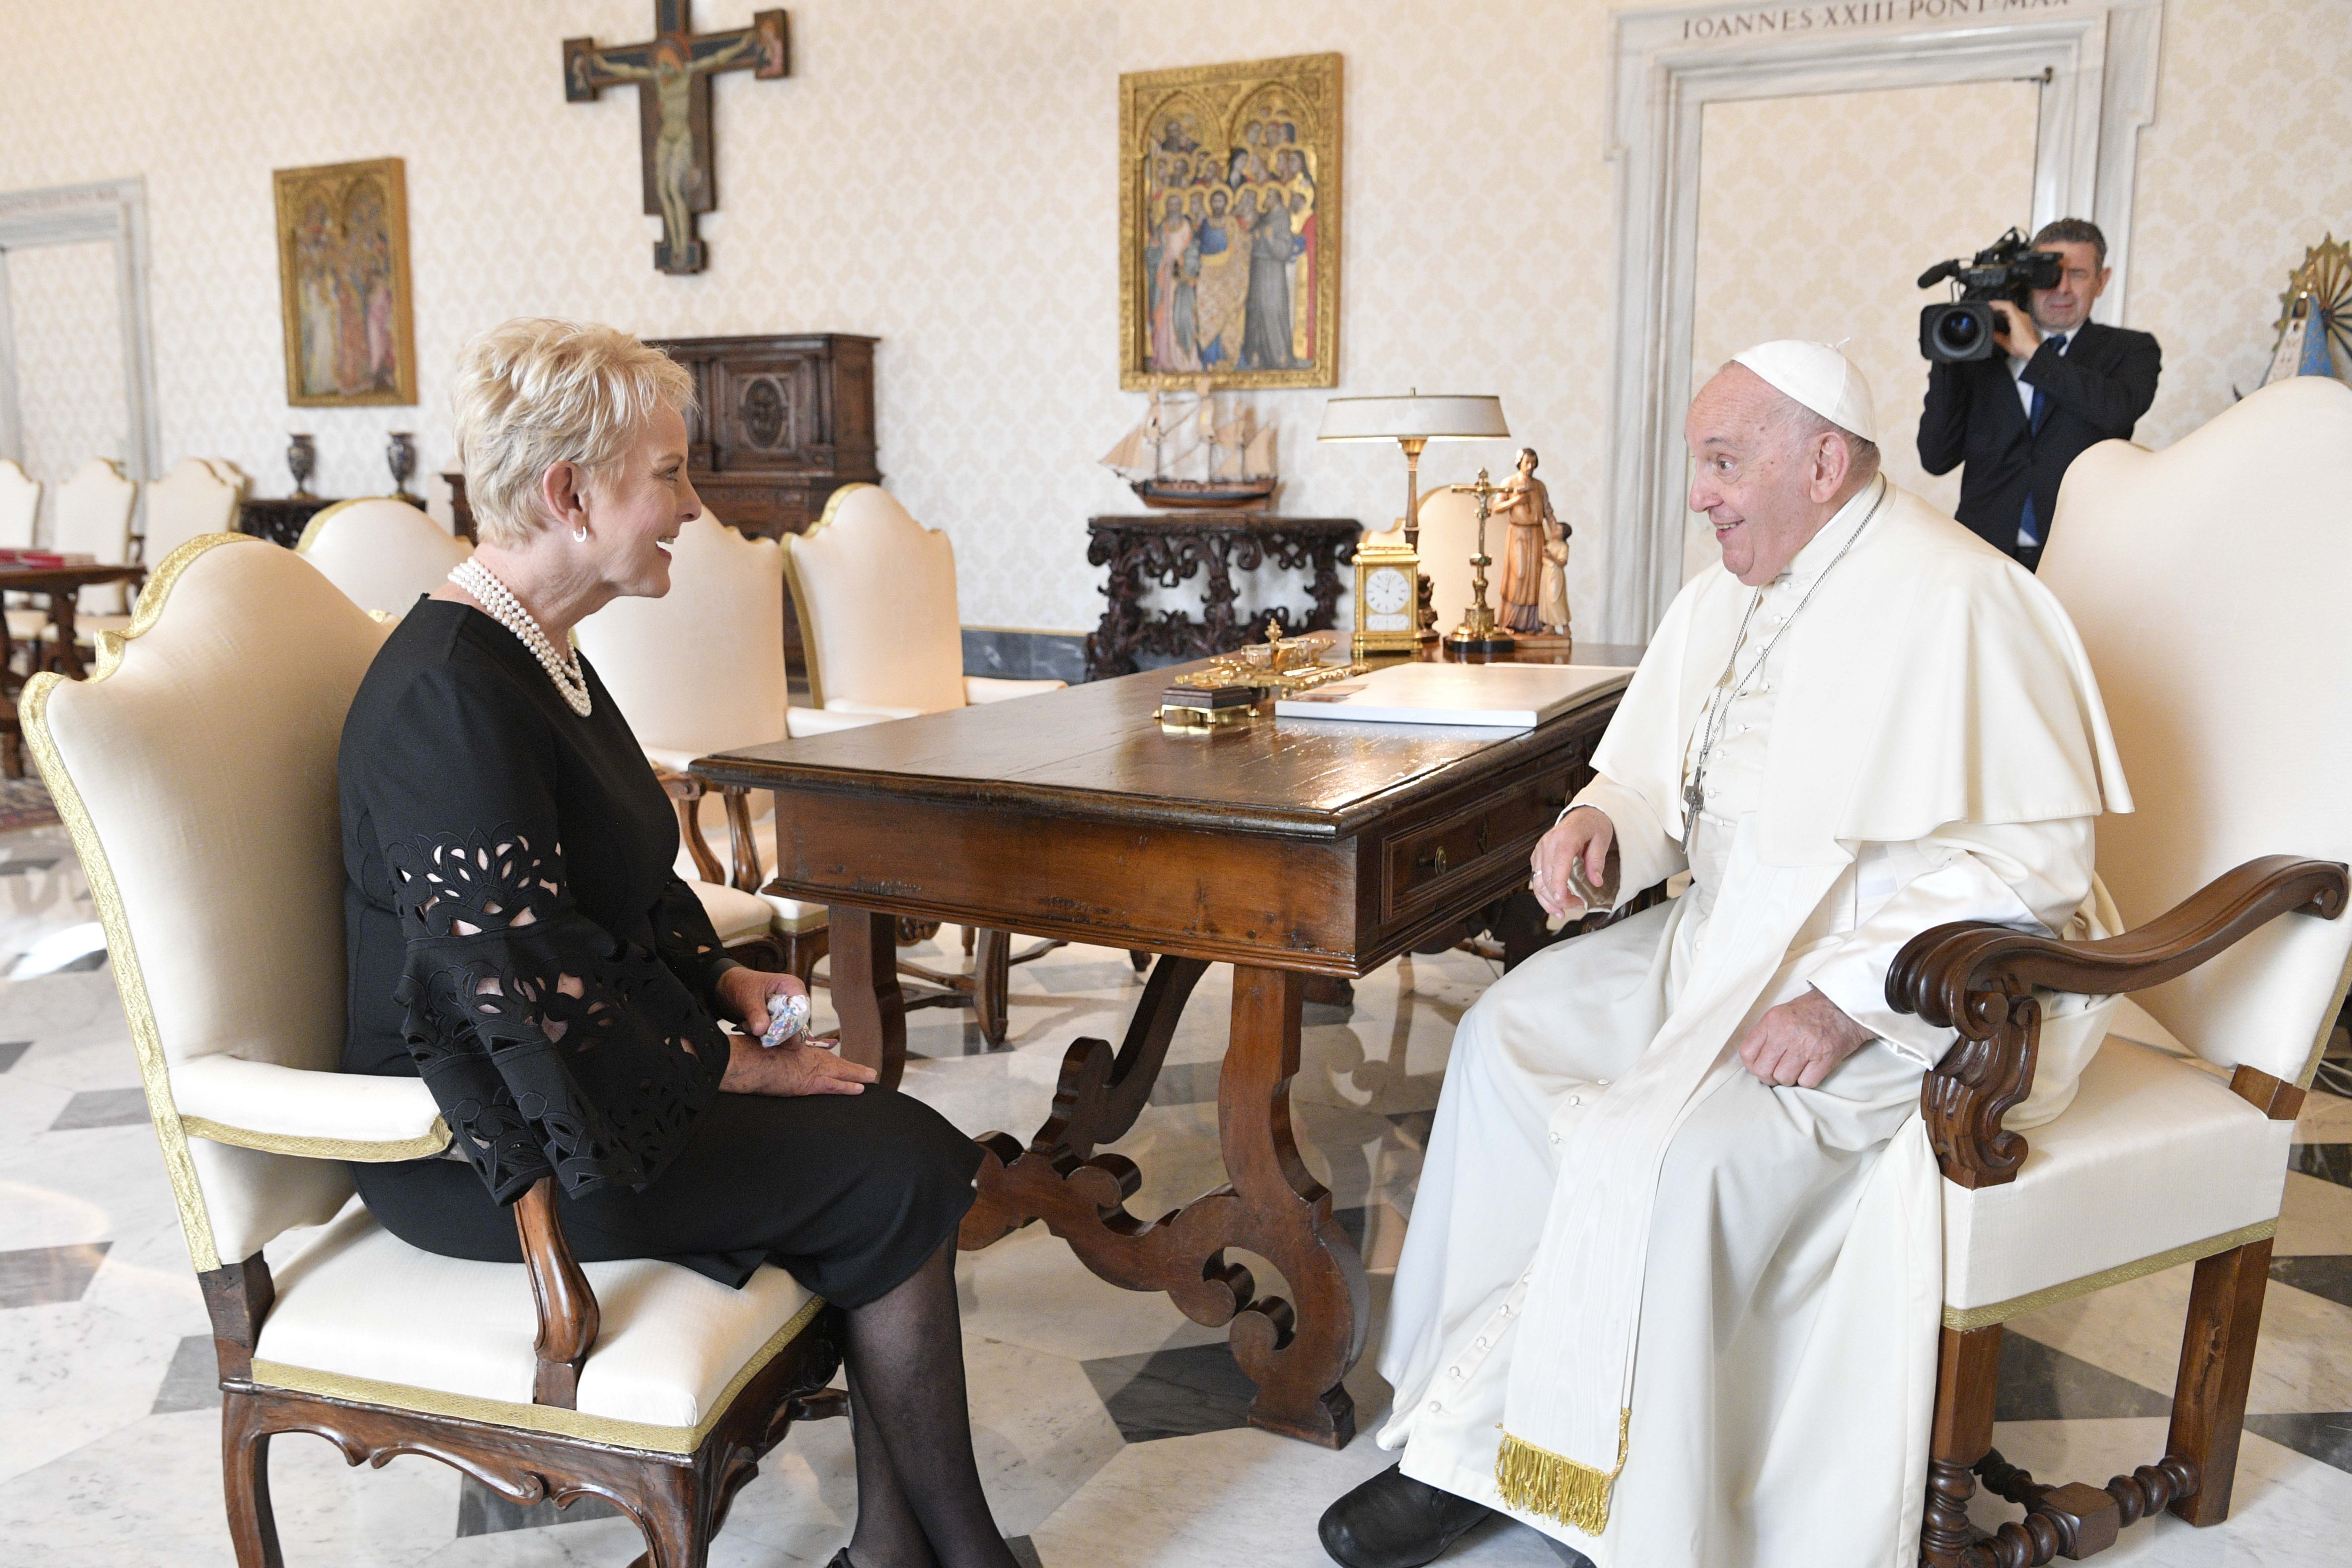 Copyright Foto © Vatican Media. Ms. Cindy McCain, Executive Director World Food Programme, audience with Pope Francis.